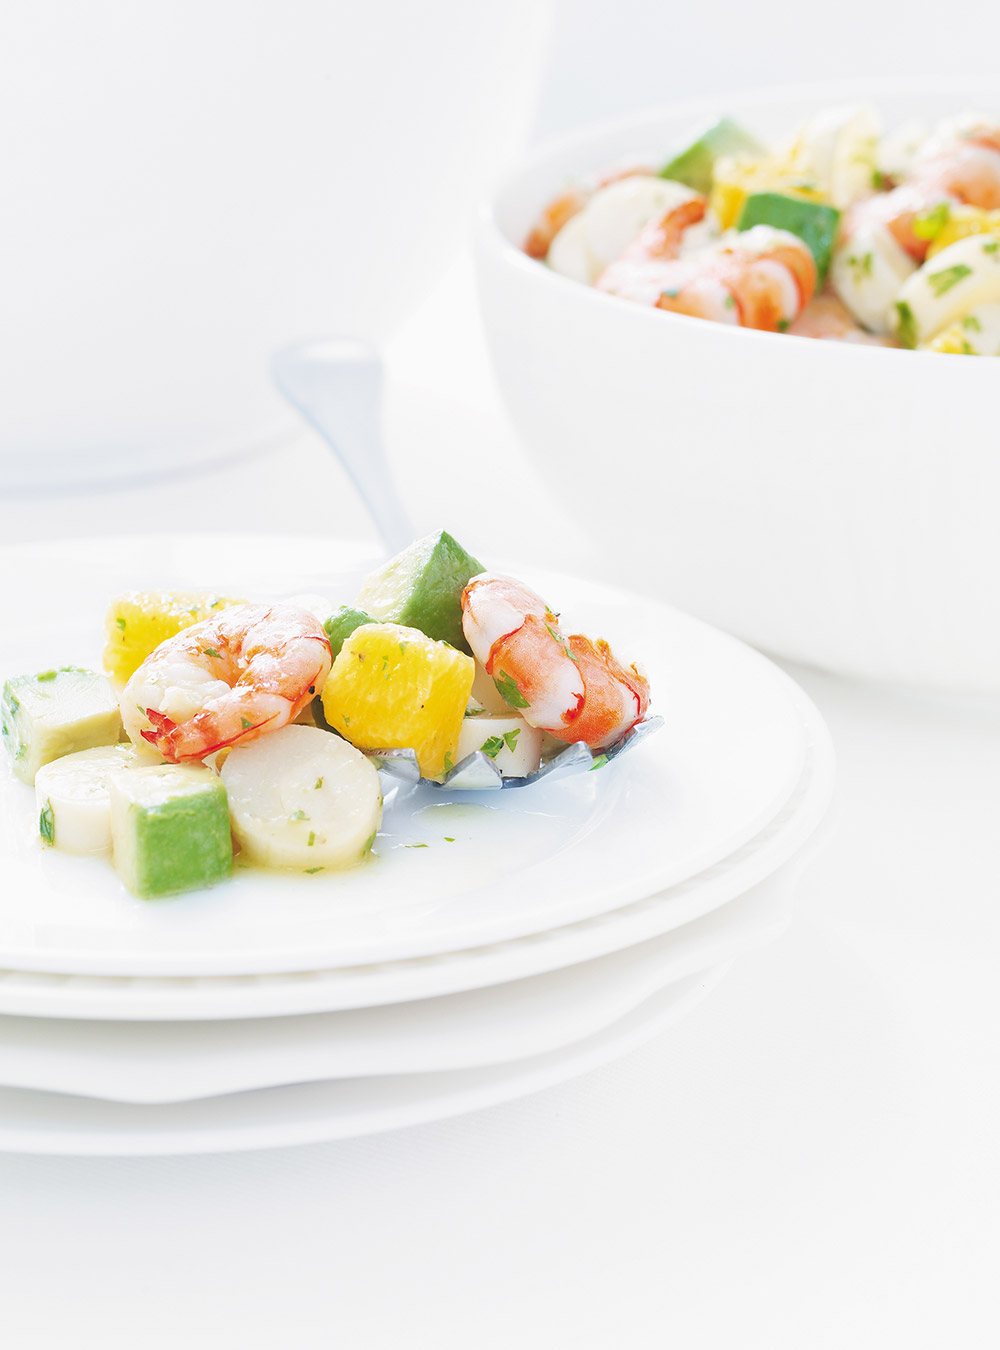 Shrimp and Hearts of Palm Salad 